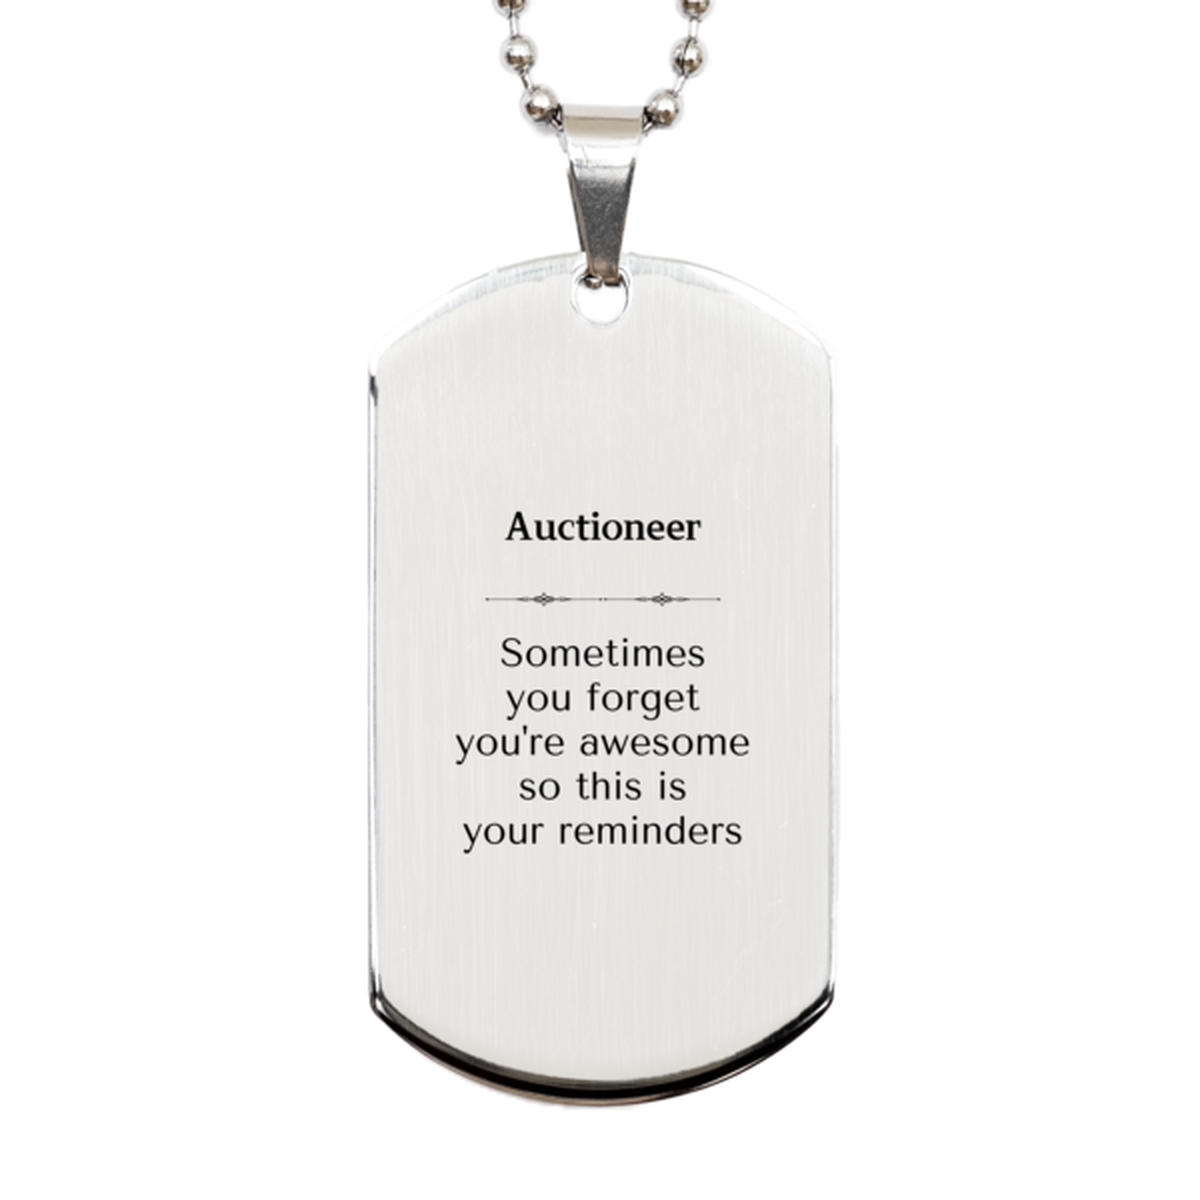 Sentimental Auctioneer Silver Dog Tag, Auctioneer Sometimes you forget you're awesome so this is your reminders, Graduation Christmas Birthday Gifts for Auctioneer, Men, Women, Coworkers